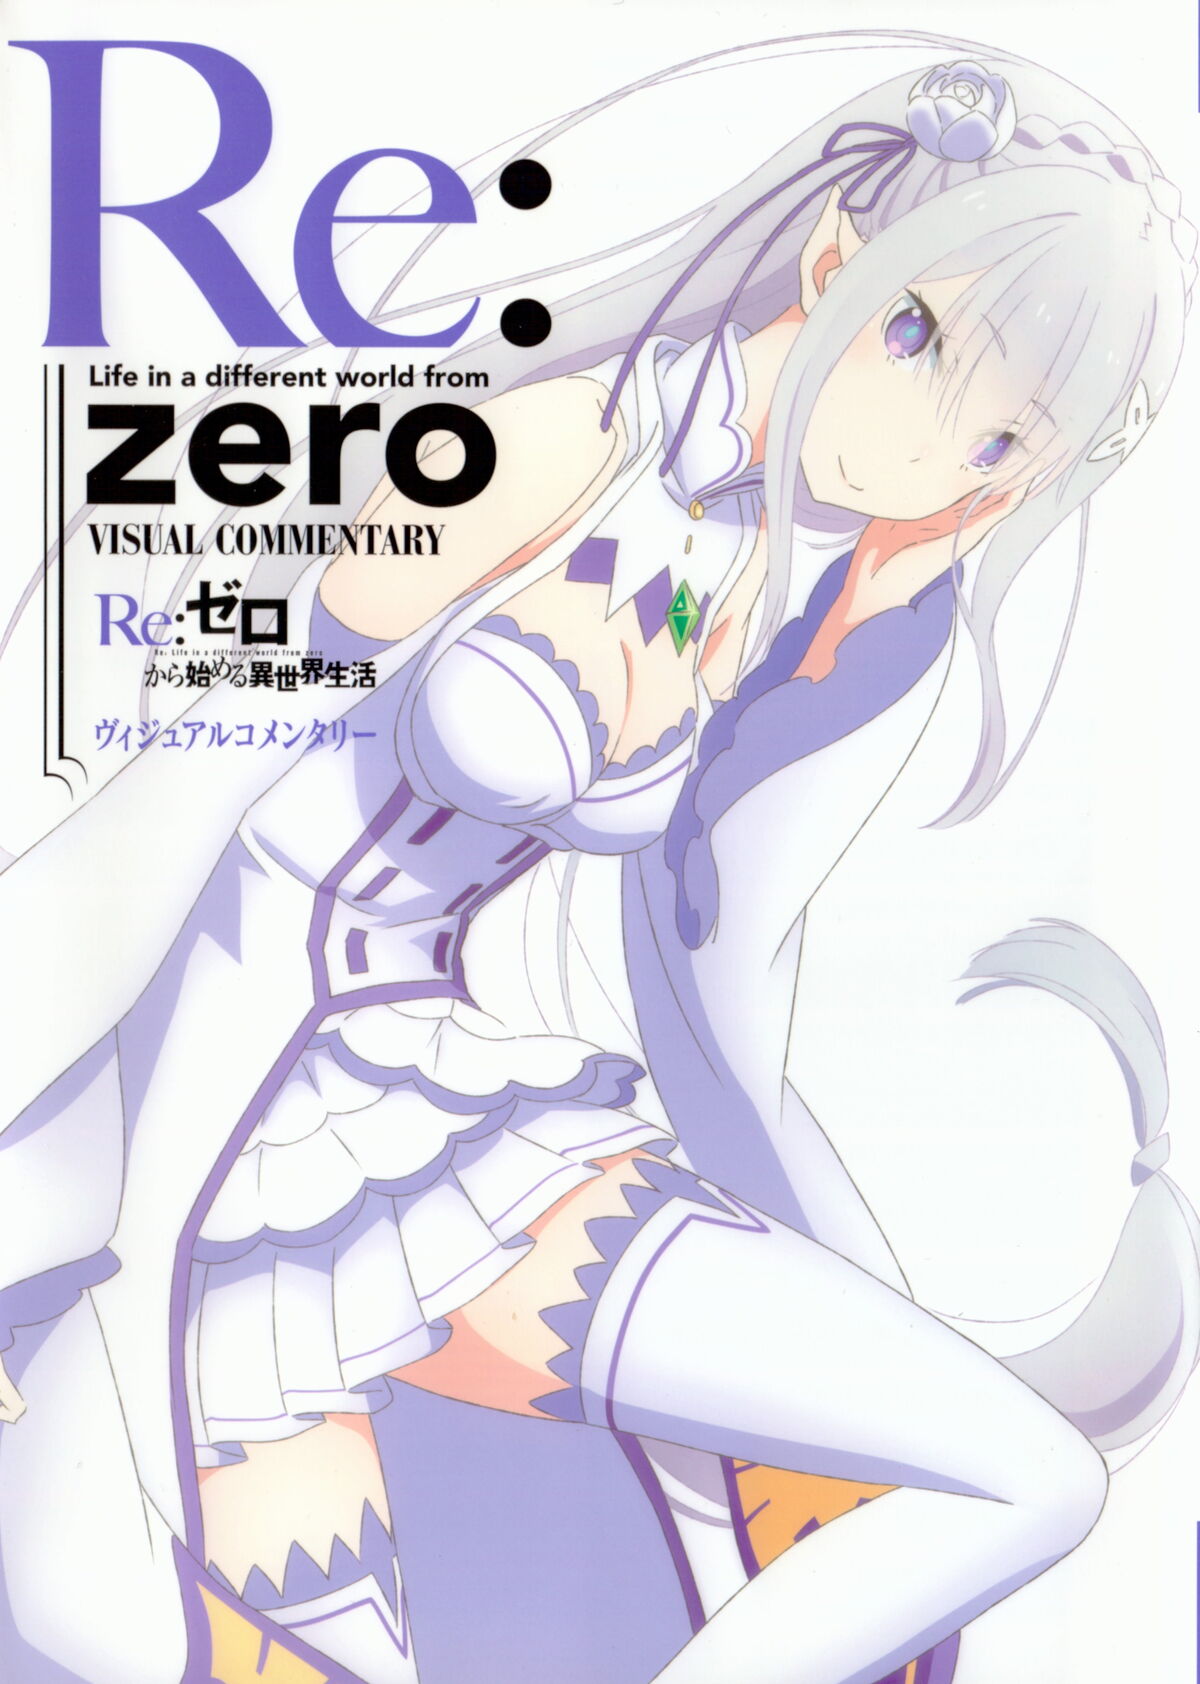 Re: Life in a different world from Zero Visual Commentary Anime Fan Book  Japan